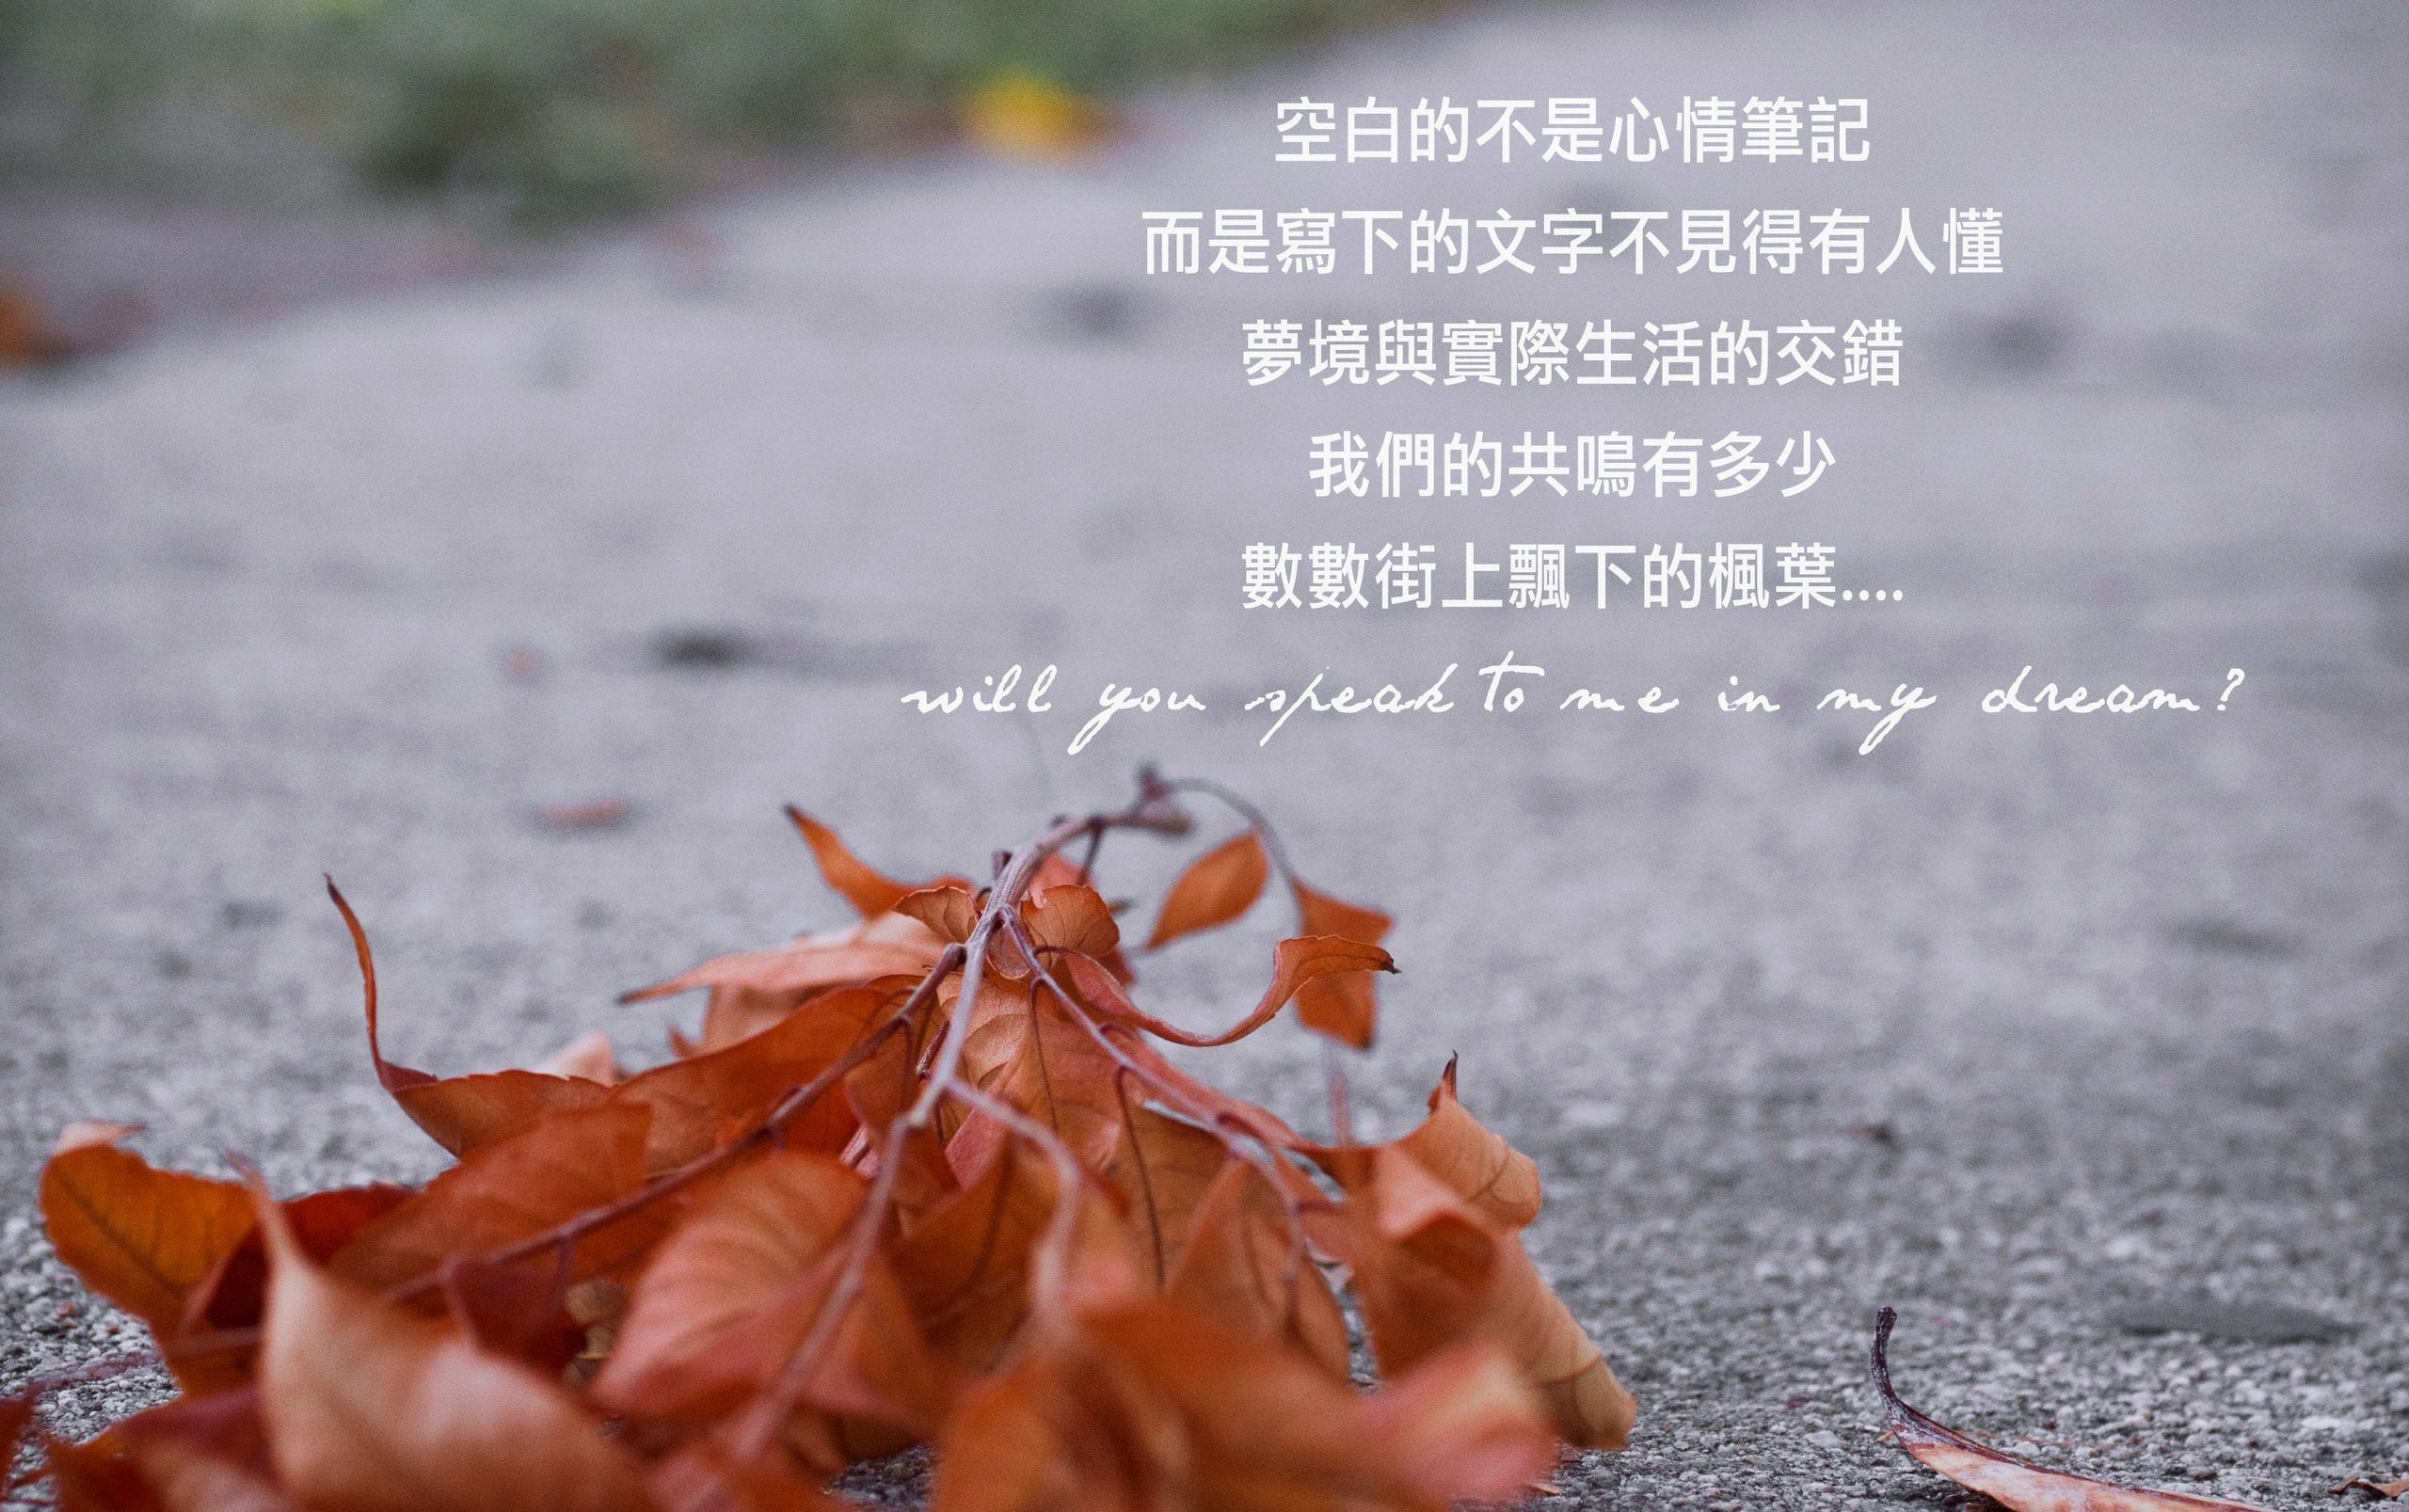 Photo and poem by Hedy Yudaw